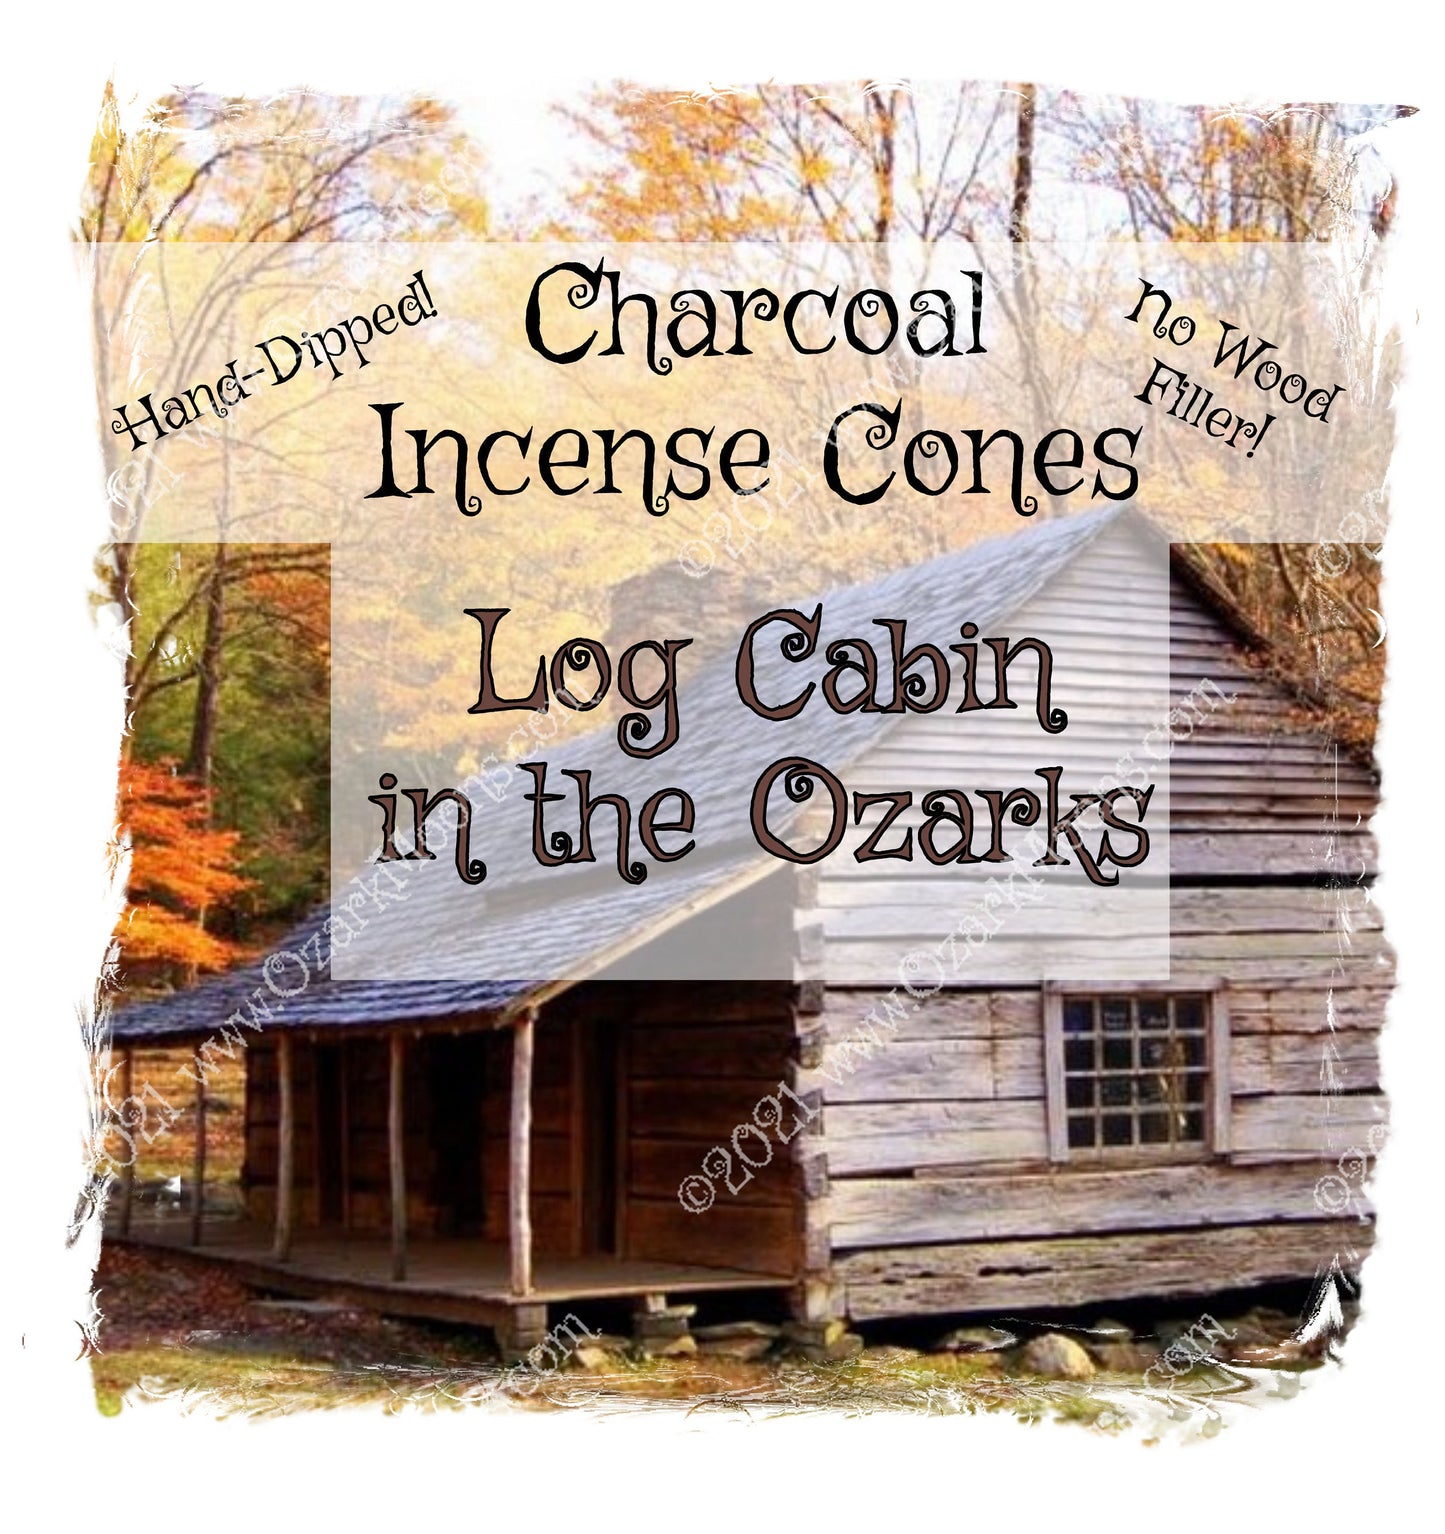 Log Cabin in the Ozarks Charcoal 1" Incense Cones - Hand-Dipped Highly Scented with Oak, Flannel, and Cedarwood, Soft Rustic Lodge Fragrance